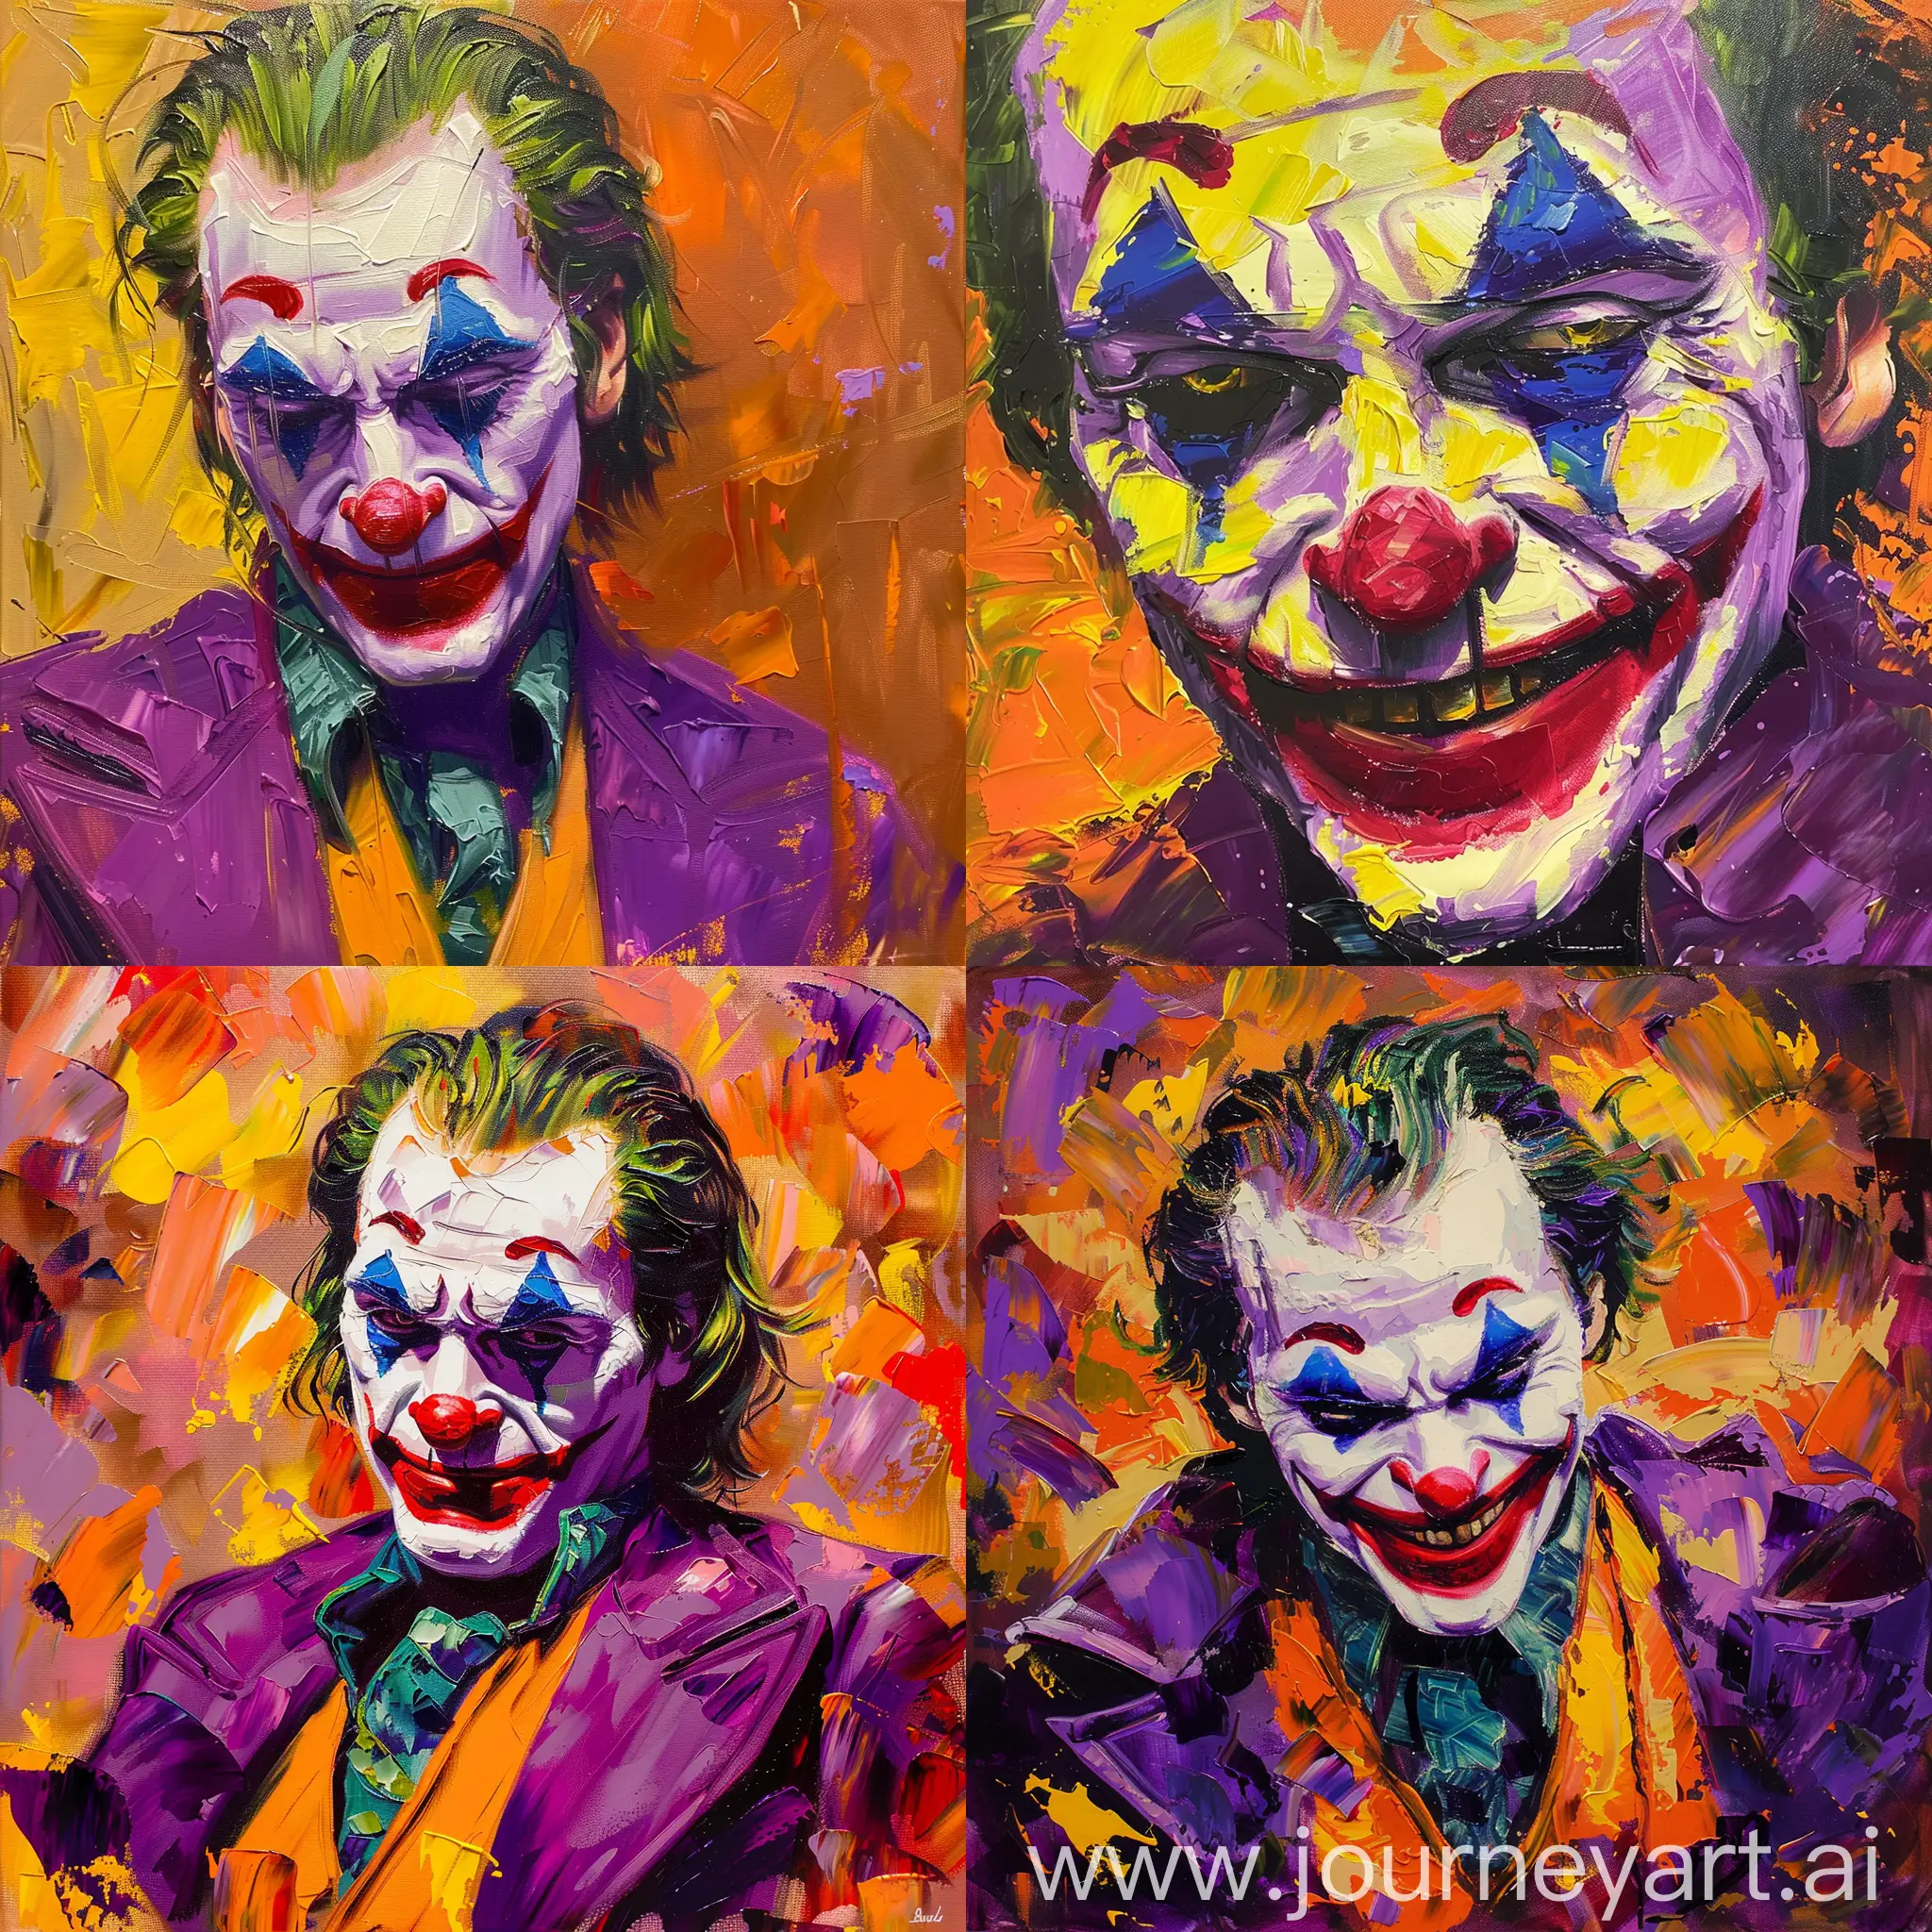 oil painting of joker in star wars style with bright purple, yellow, orange and red
